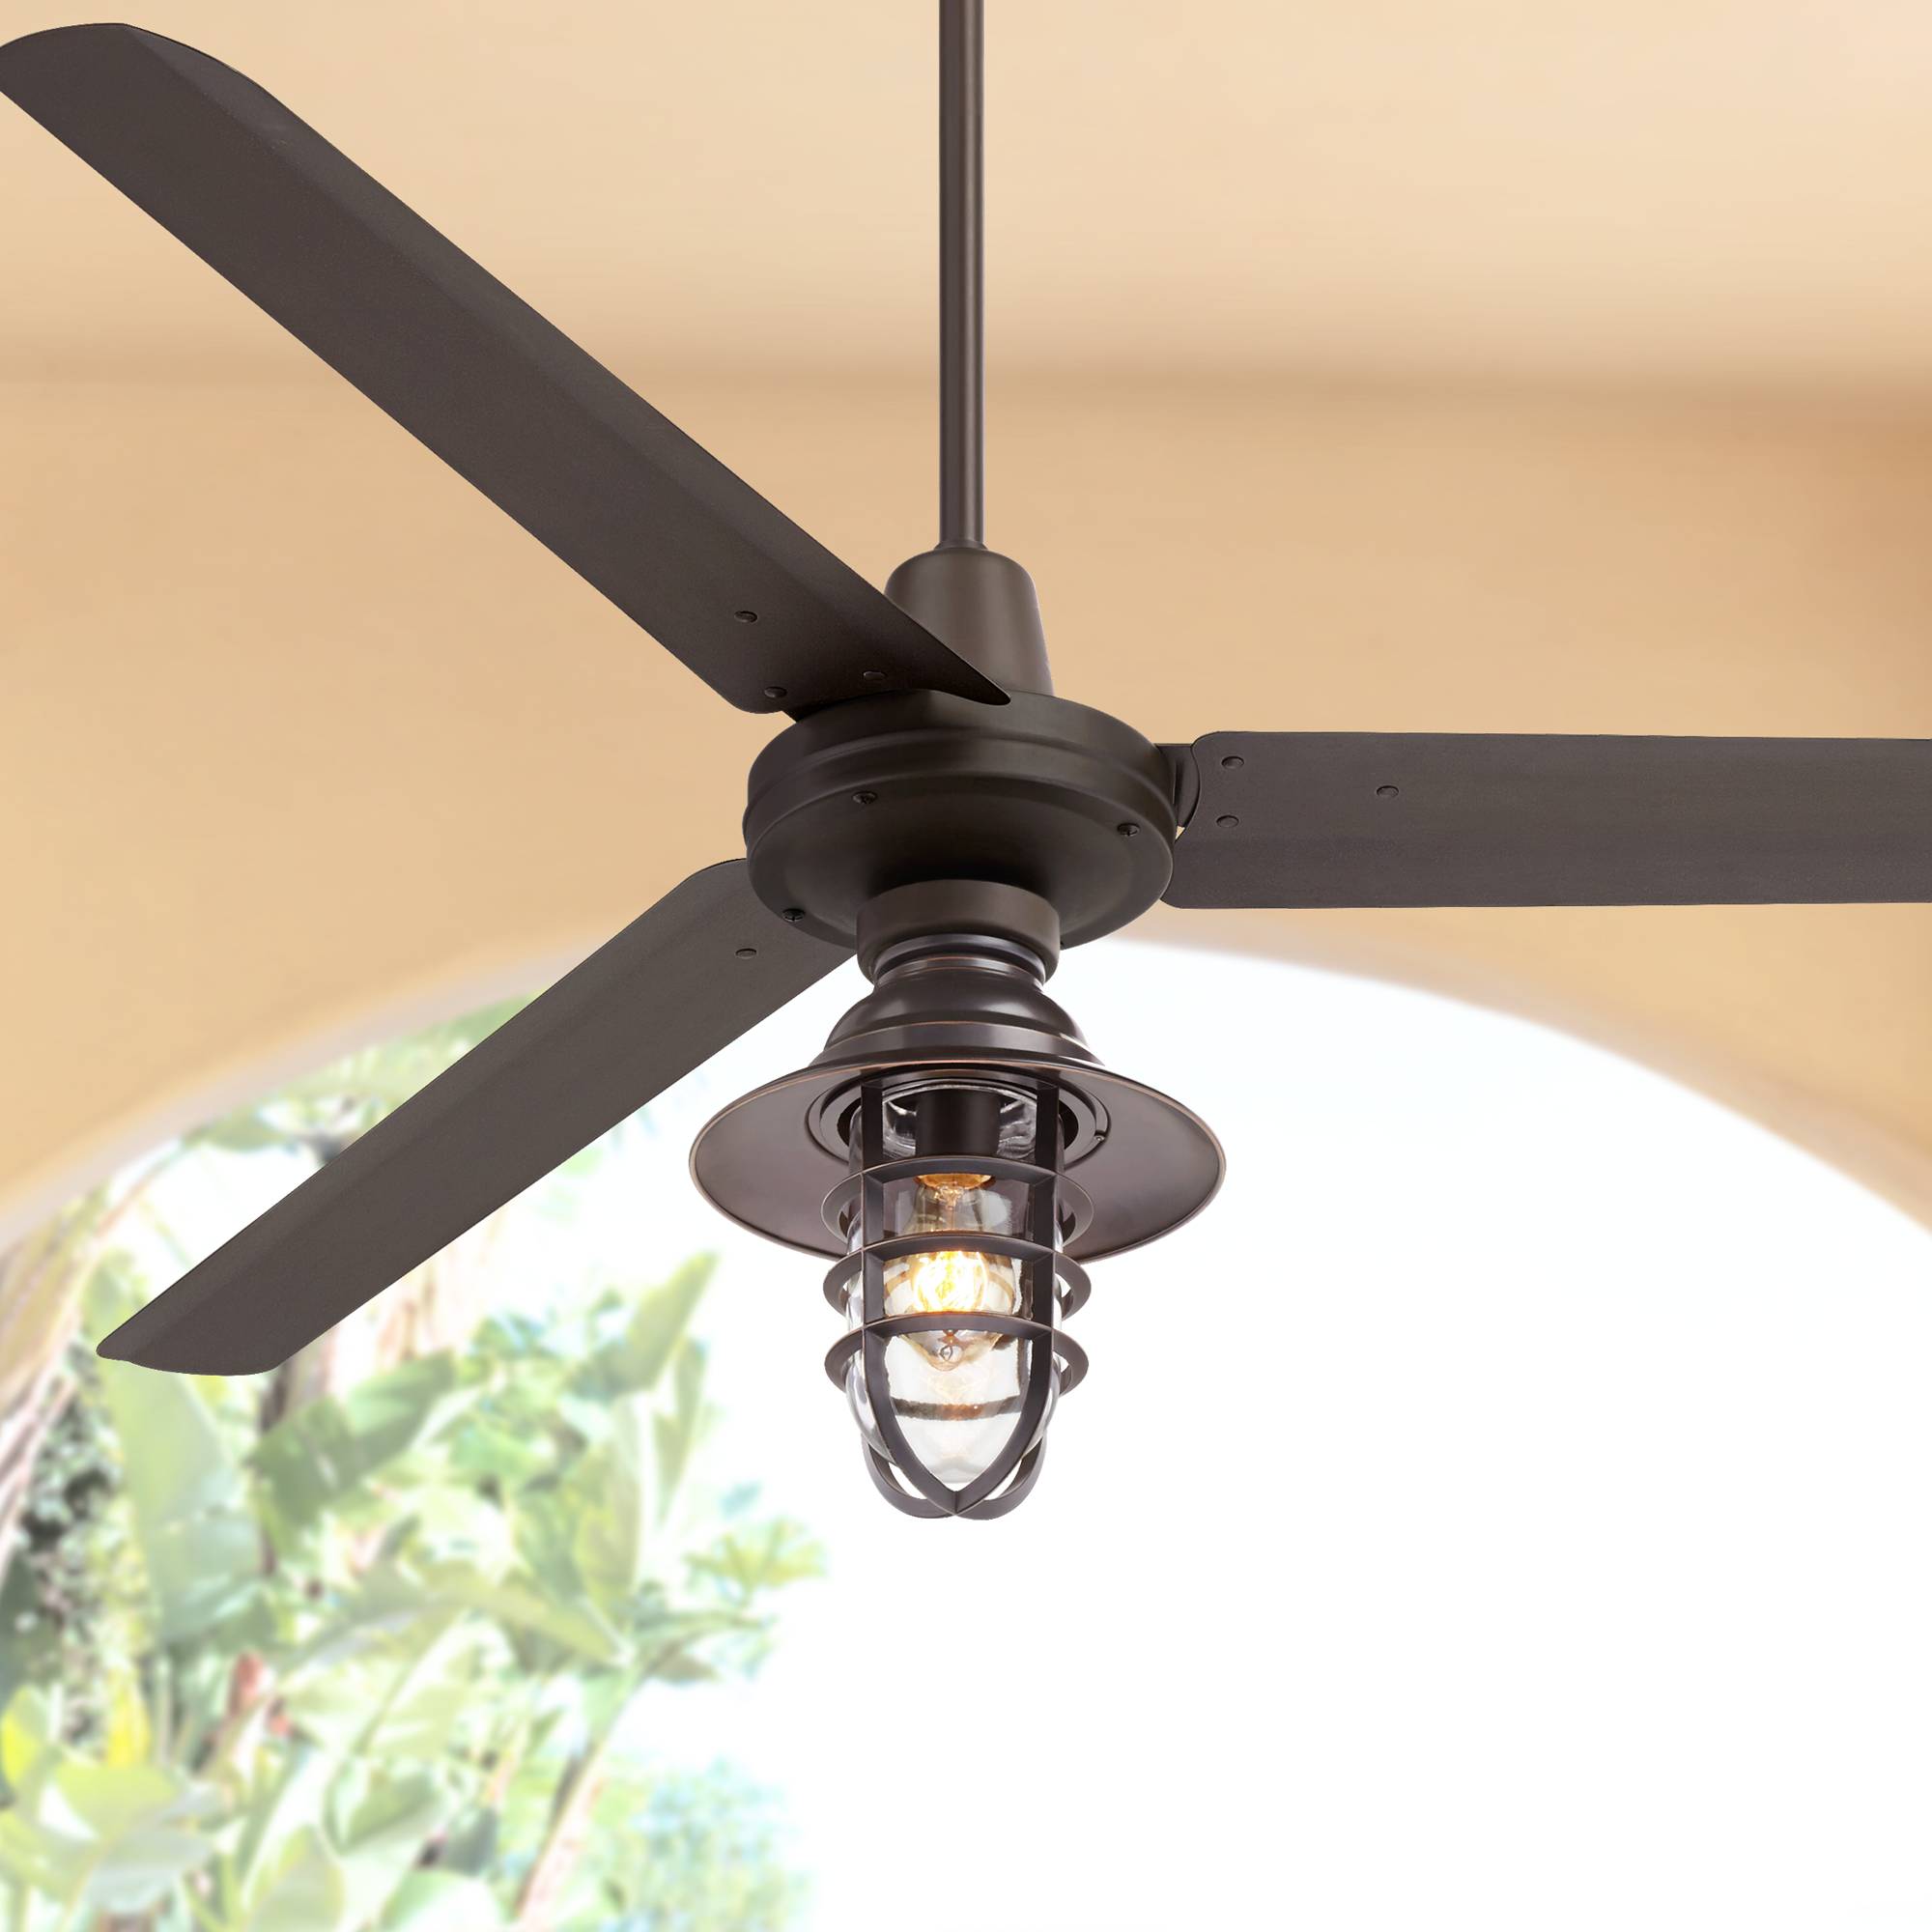 60 Industrial Outdoor Ceiling Fan With Led Light Remote Bronze